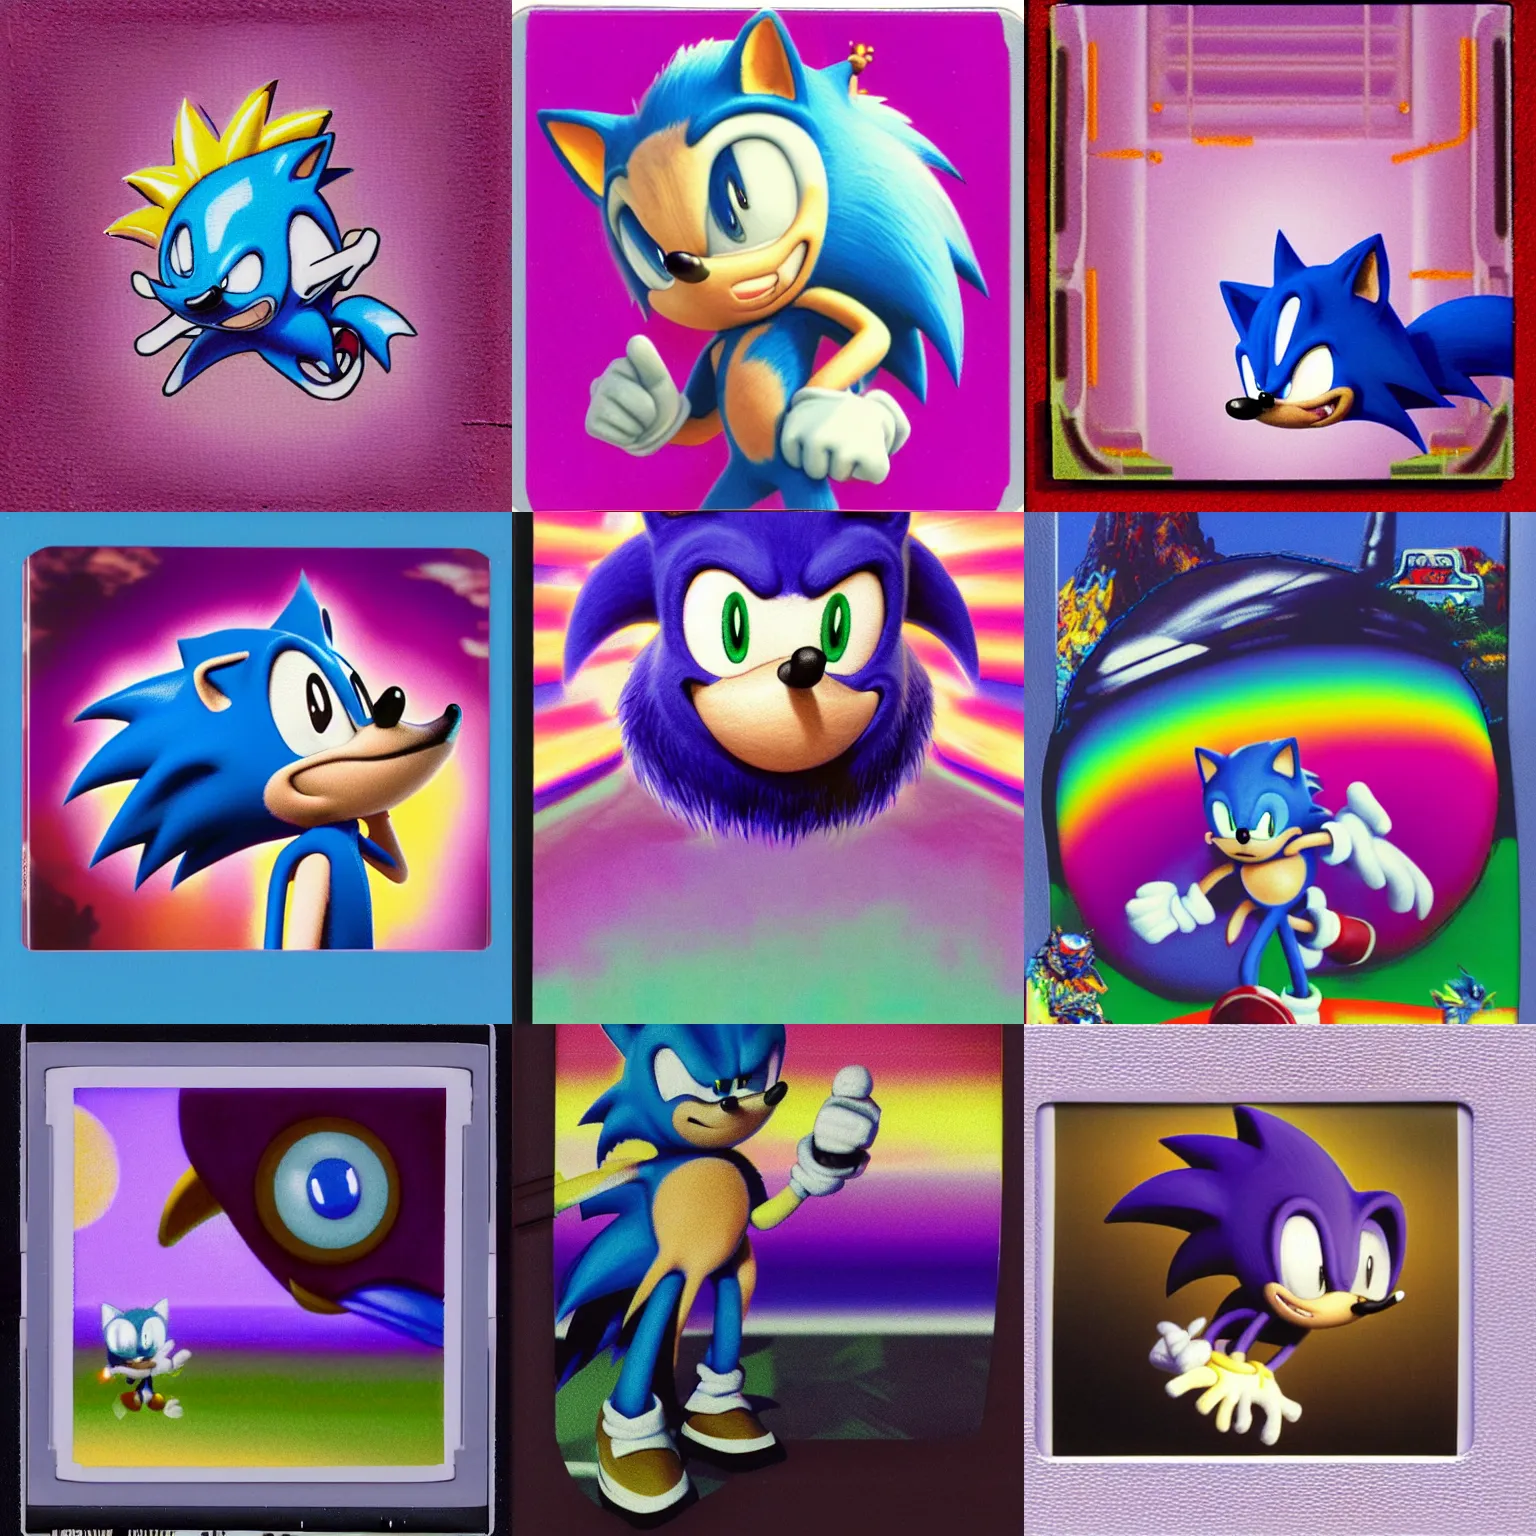 Prompt: polaroid instax portrait of sonic hedgehog and a matte painting landscape of a surreal, professional, soft pastels, high quality airbrush art album cover of a liquid dissolving airbrush art lsd dmt sonic the hedgehog swimming through cyberspace, purple checkerboard background, 1 9 9 0 s 1 9 9 2 sega rareware videogame album cover